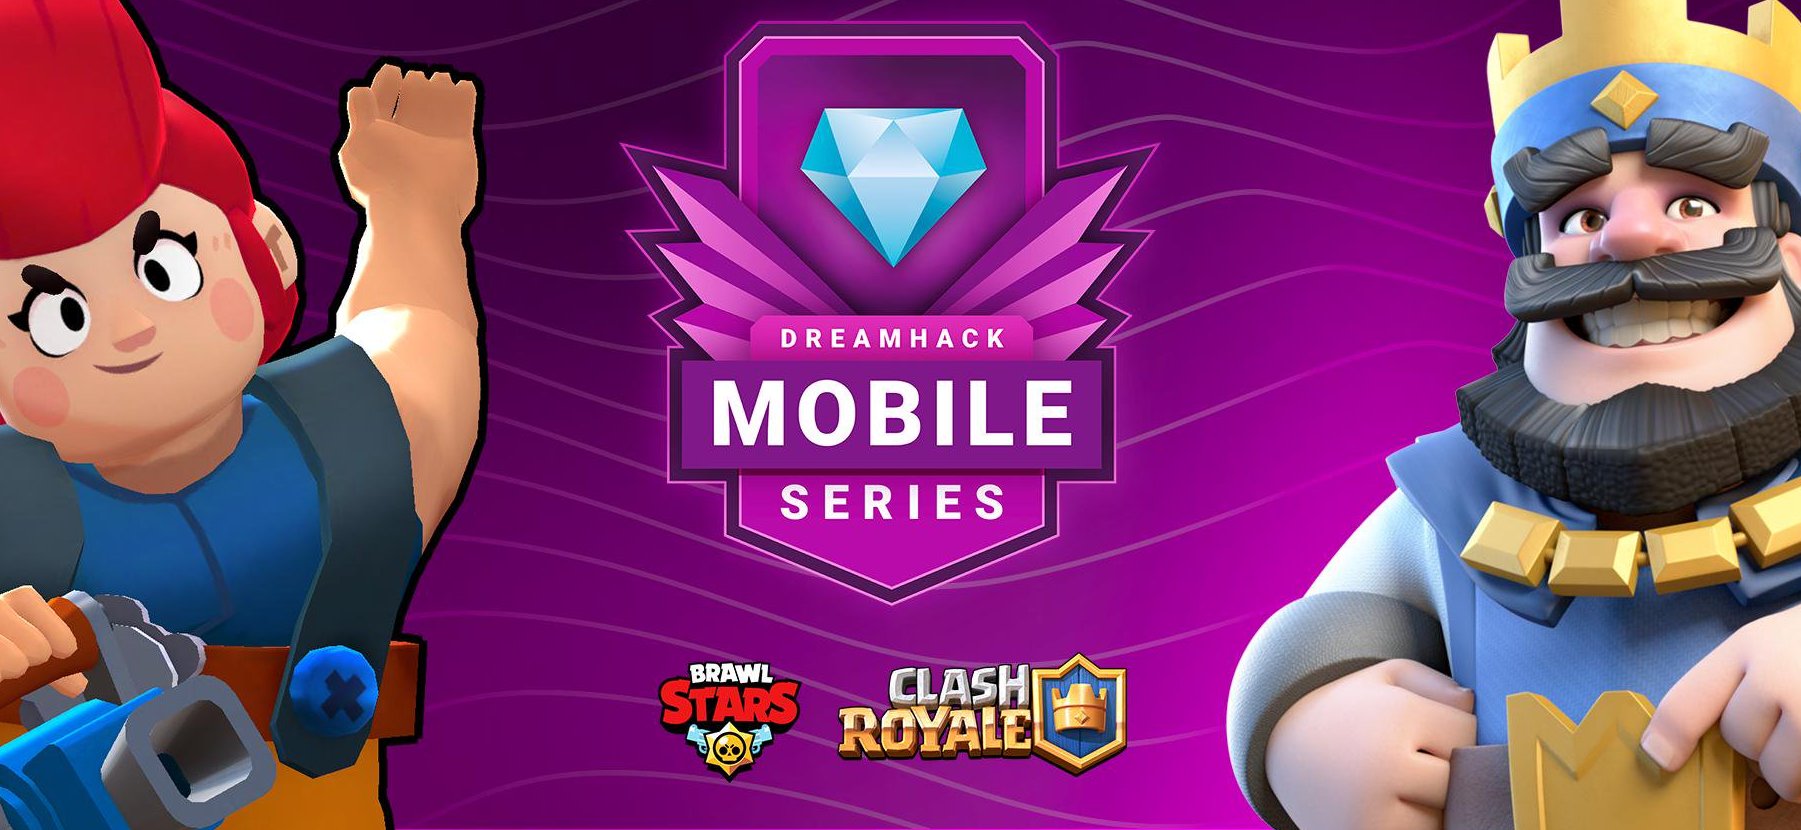 Dreamhack Mobile Series At Dallas To Be Held This Weekend And Will Feature Brawl Stars And Clash Royale Dot Esports - omen brawl stars